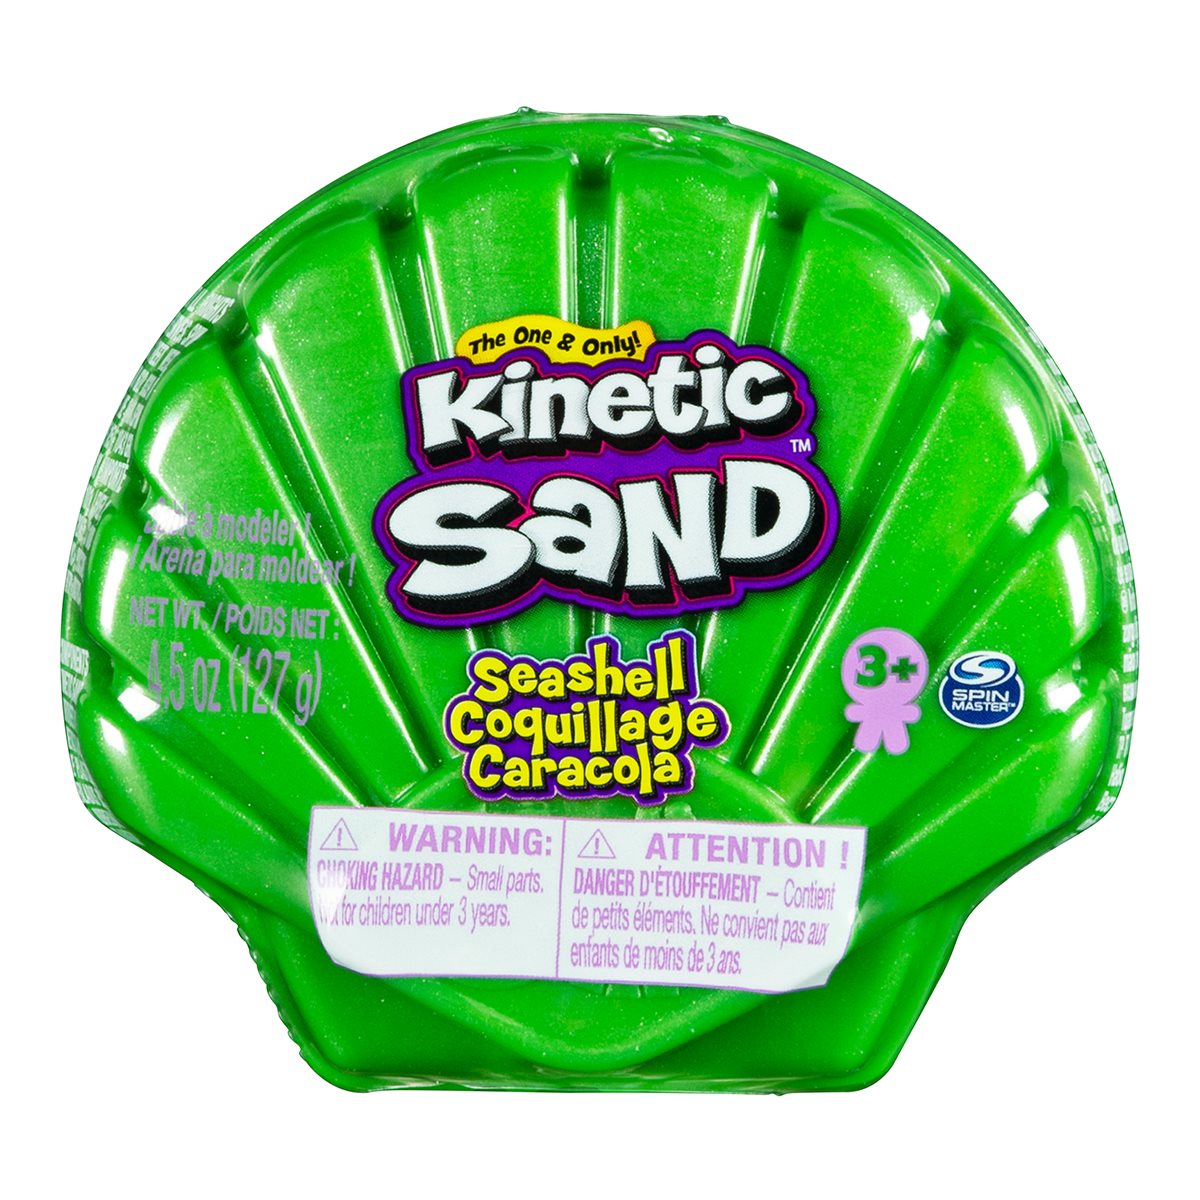 Kinetic Sand Seashell Containers 8-Pack for Kids Ages 3 and Up